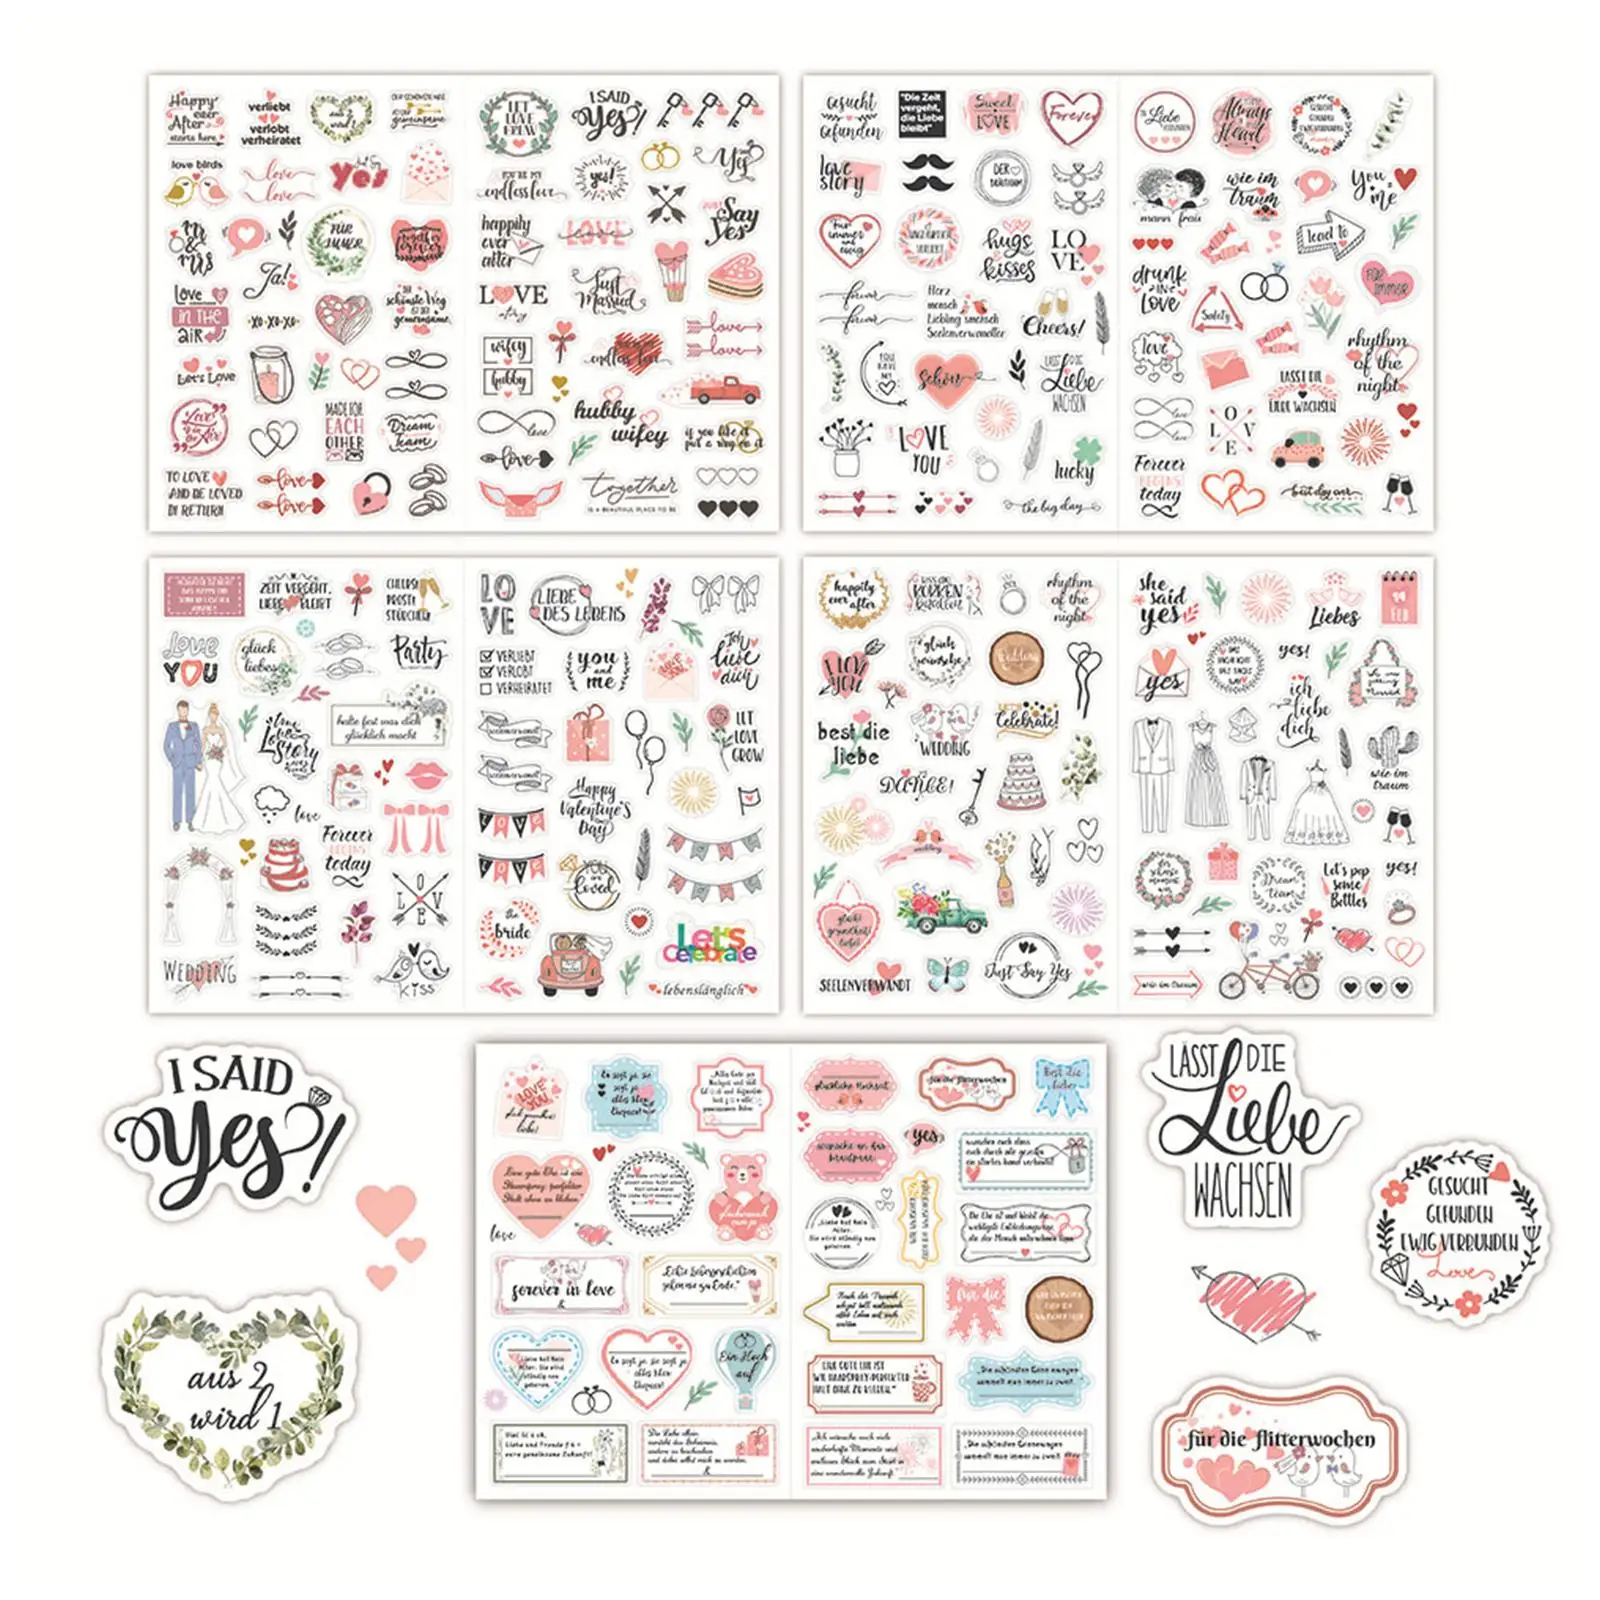 background stamps for card making 4/5 Stickers Wedding Bliss Stickers Waterproof Removable Flat Sticker Love Sticker Engagement Package Leaves Eucalyptus Pattern best clear stamps Scrapbooking & Stamps